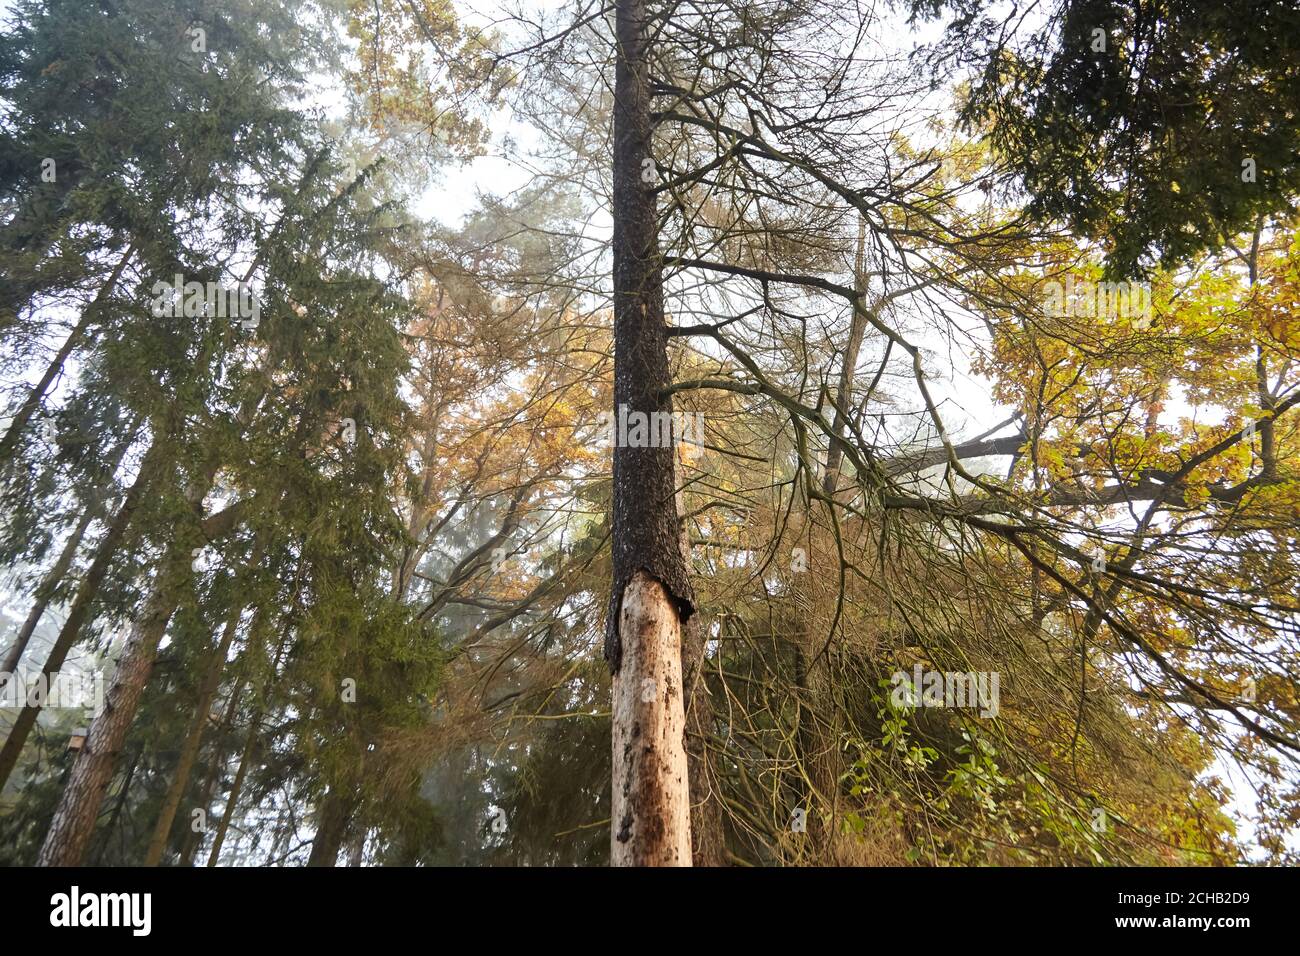 Dry trunk of spruce with exfoliating bark, Diseased fir tree damaged by bark beetle, nature, autumn forest Stock Photo